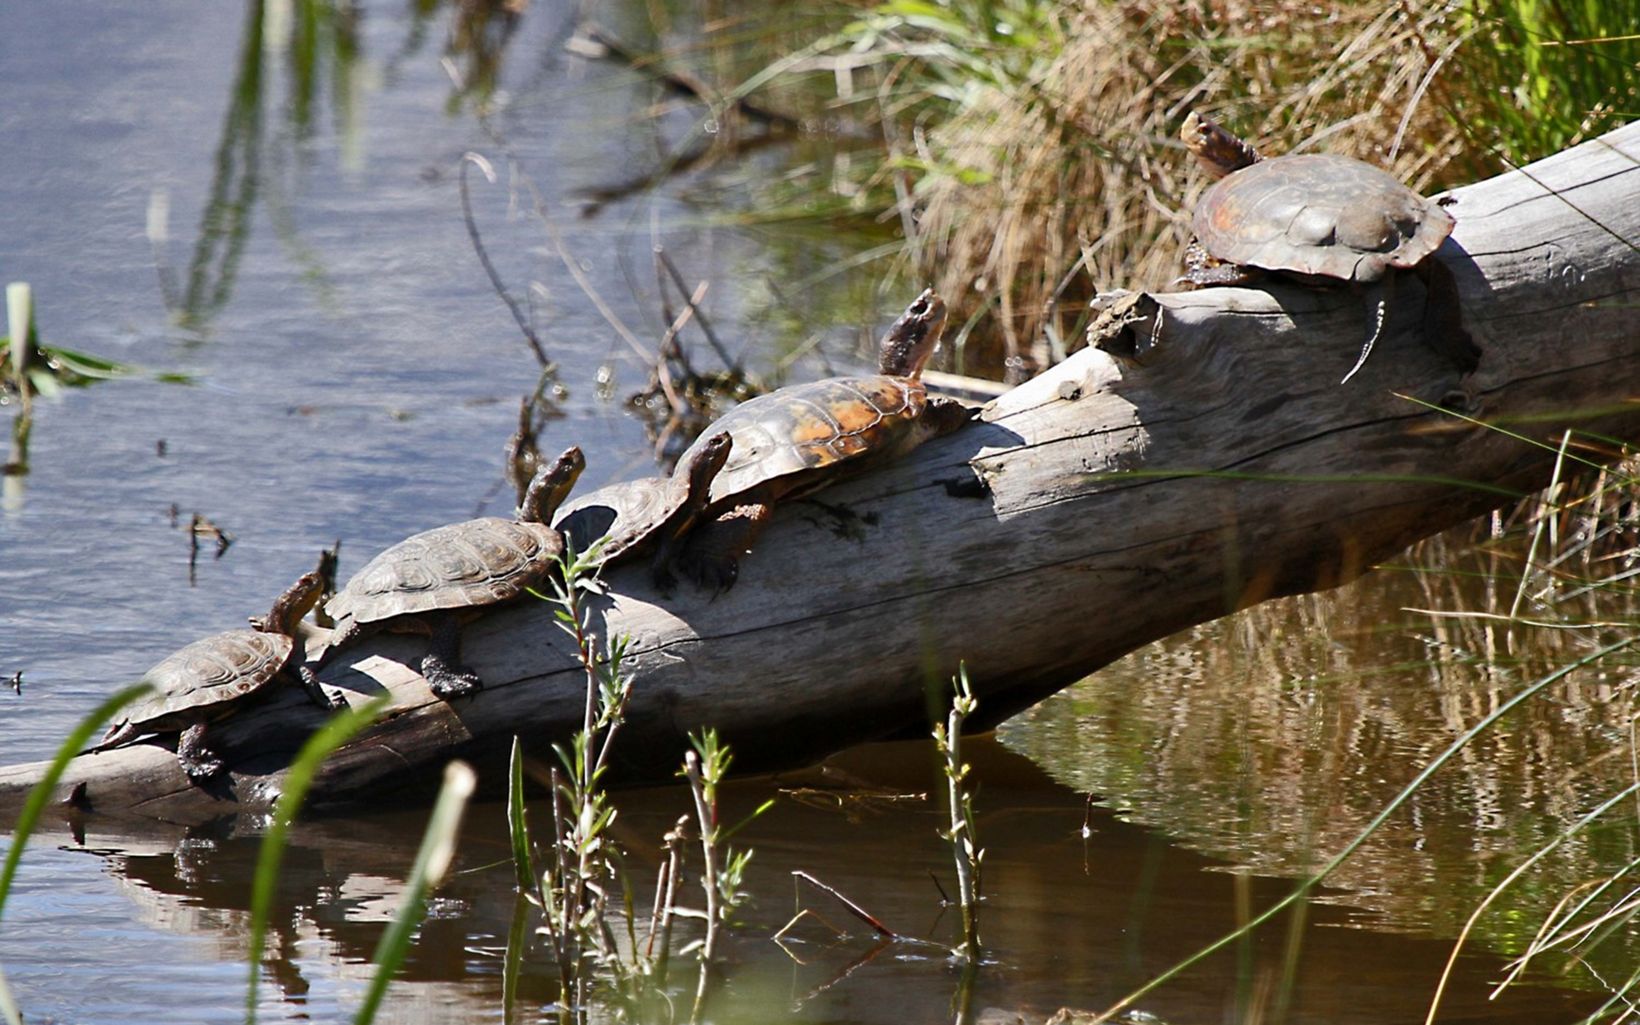 Western pond turtles The Western pond turtle is Nevada's only freshwater turtle. These reptiles live at our River Fork Ranch Preserve in the Carson Valley, but we don’t know much about their habits, movements or histories.In order to learn more about these turtles, we launched a study at River Fork Ranch Preserve—with help from the American Turtle Observatory and Nevada Department of Wildlife–using radio telemetry and genetic analyses. The goal of the study is to evaluate the habitat use, home range, dispersal patterns, population dynamics and genetic source of the pond turtle populations in northwestern Nevada.     © Doug Dill